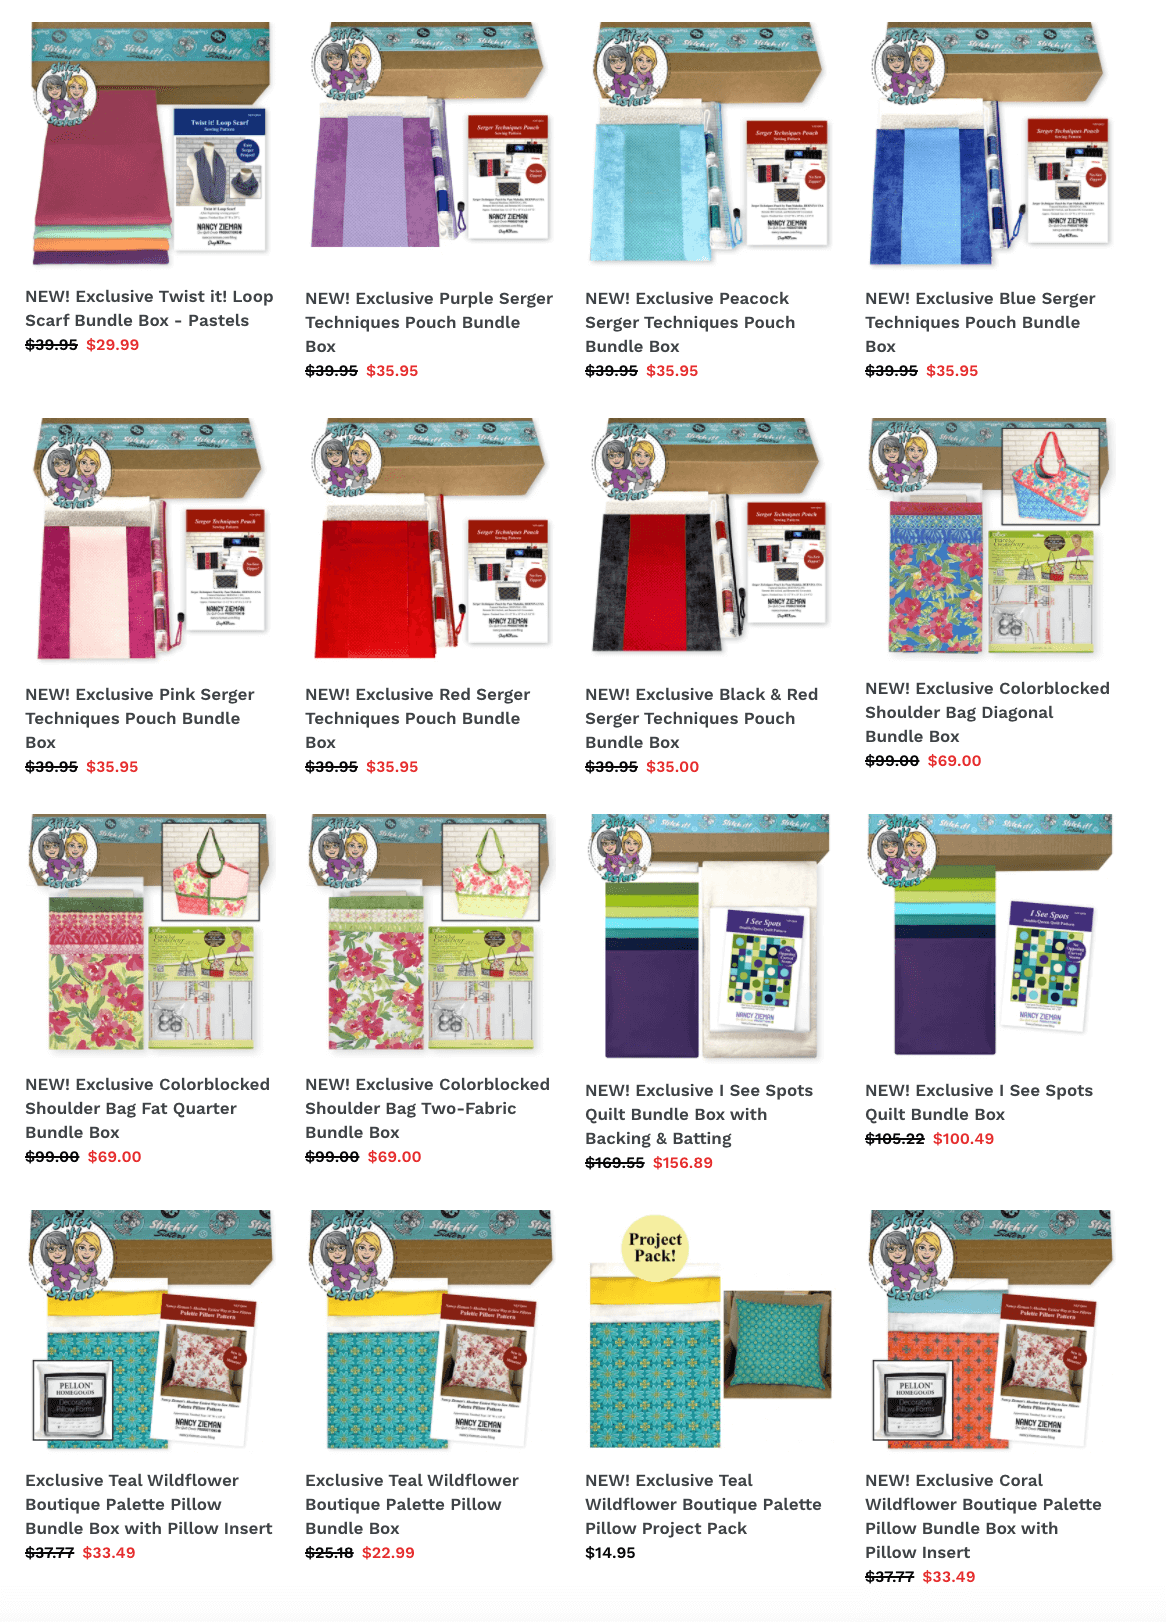 New Sewing Kit Project Bundle Boxes available at Nancy Zieman Productions at ShopNZP.com